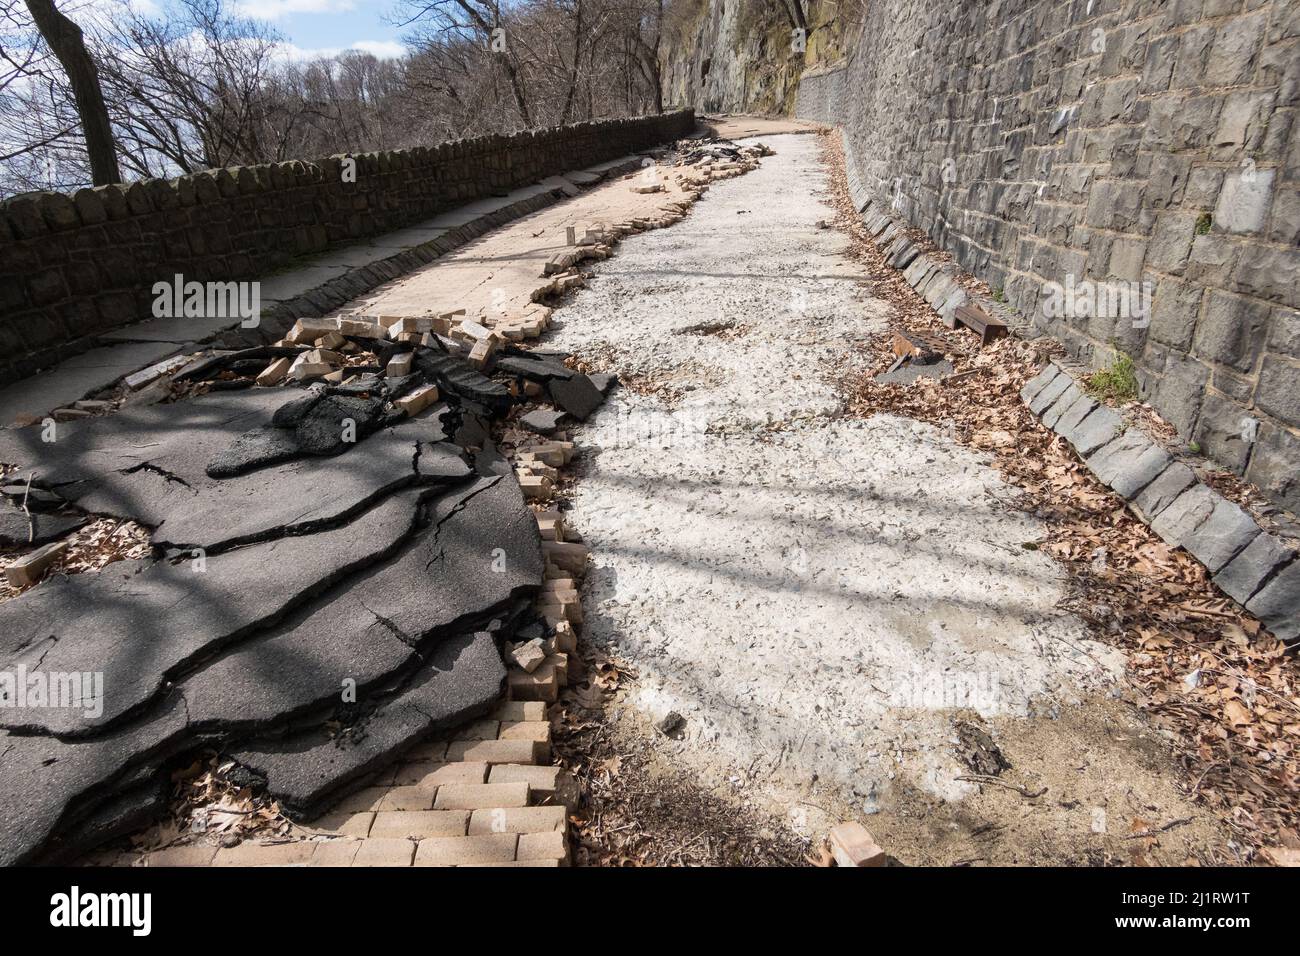 Aftermath of the hurricane, tropical storm Ida - damaged pavement on Dyckman Hill Road, Englewood Cliffs entrance to the Palisades Interstate Park, NJ Stock Photo